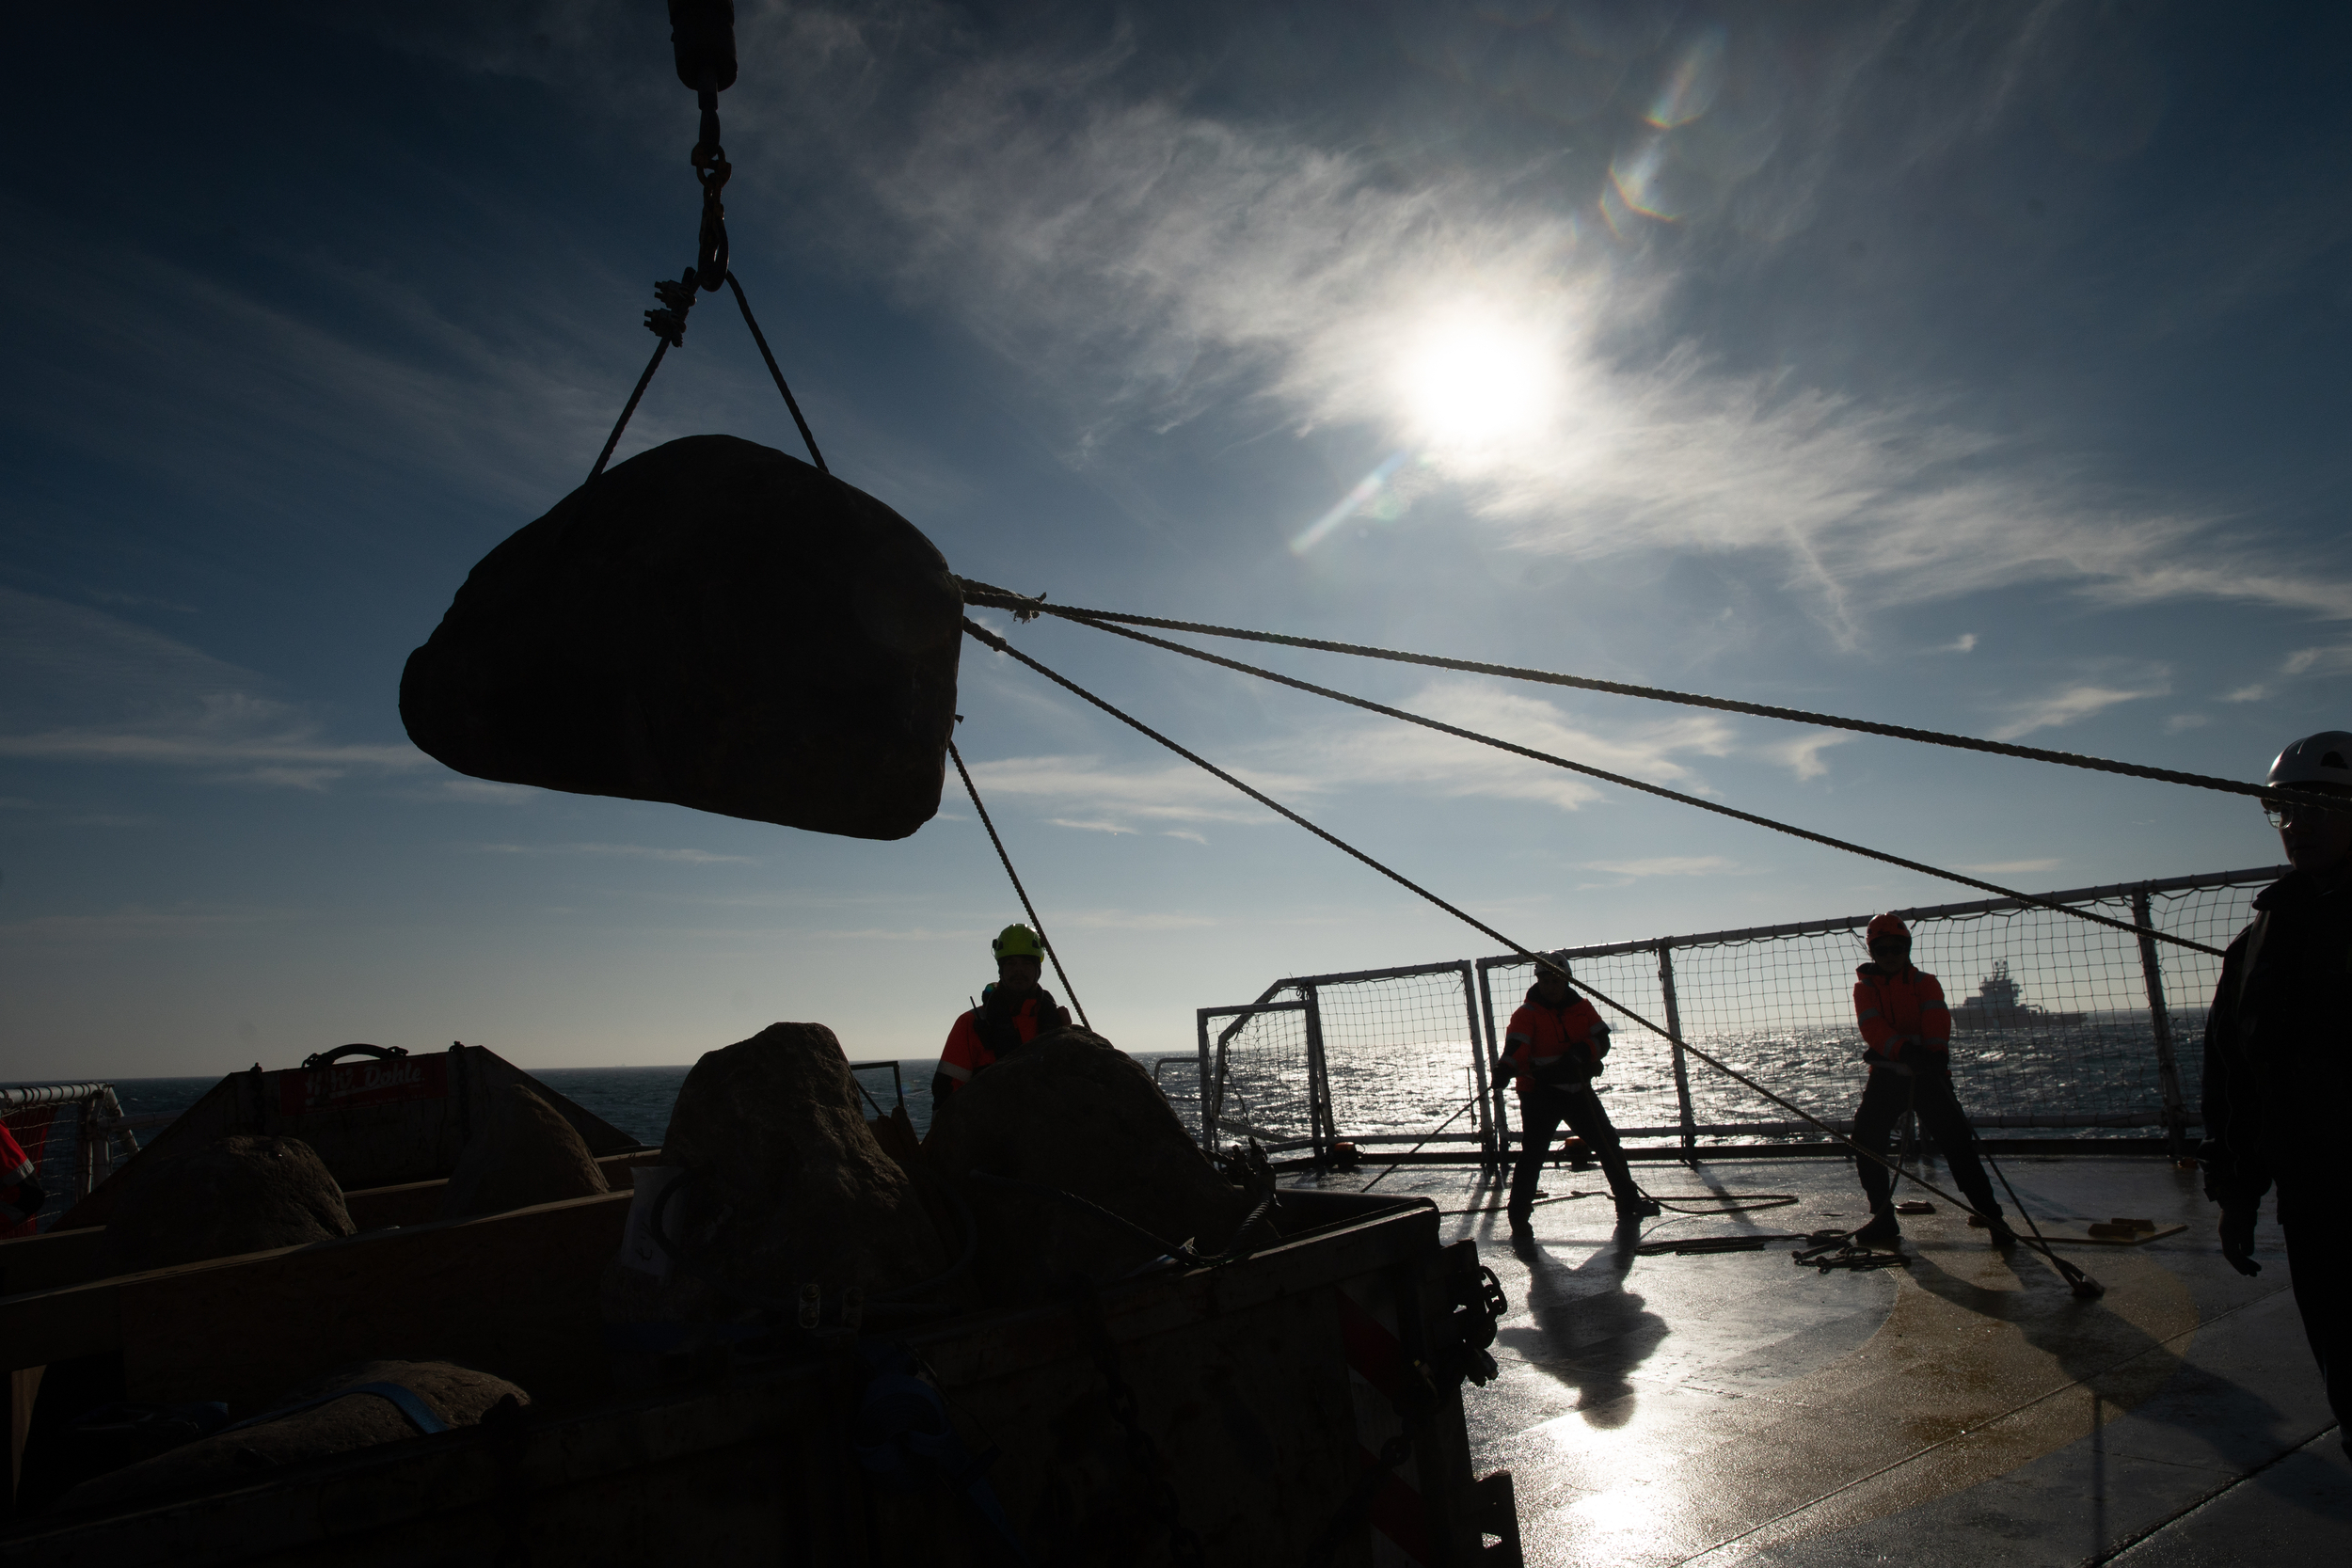 A boulder is silhouetted against a bright blue sky as it's lifted off the deck of a ship by a crane. Crew members surround the boulder, using ropes to control its movement.